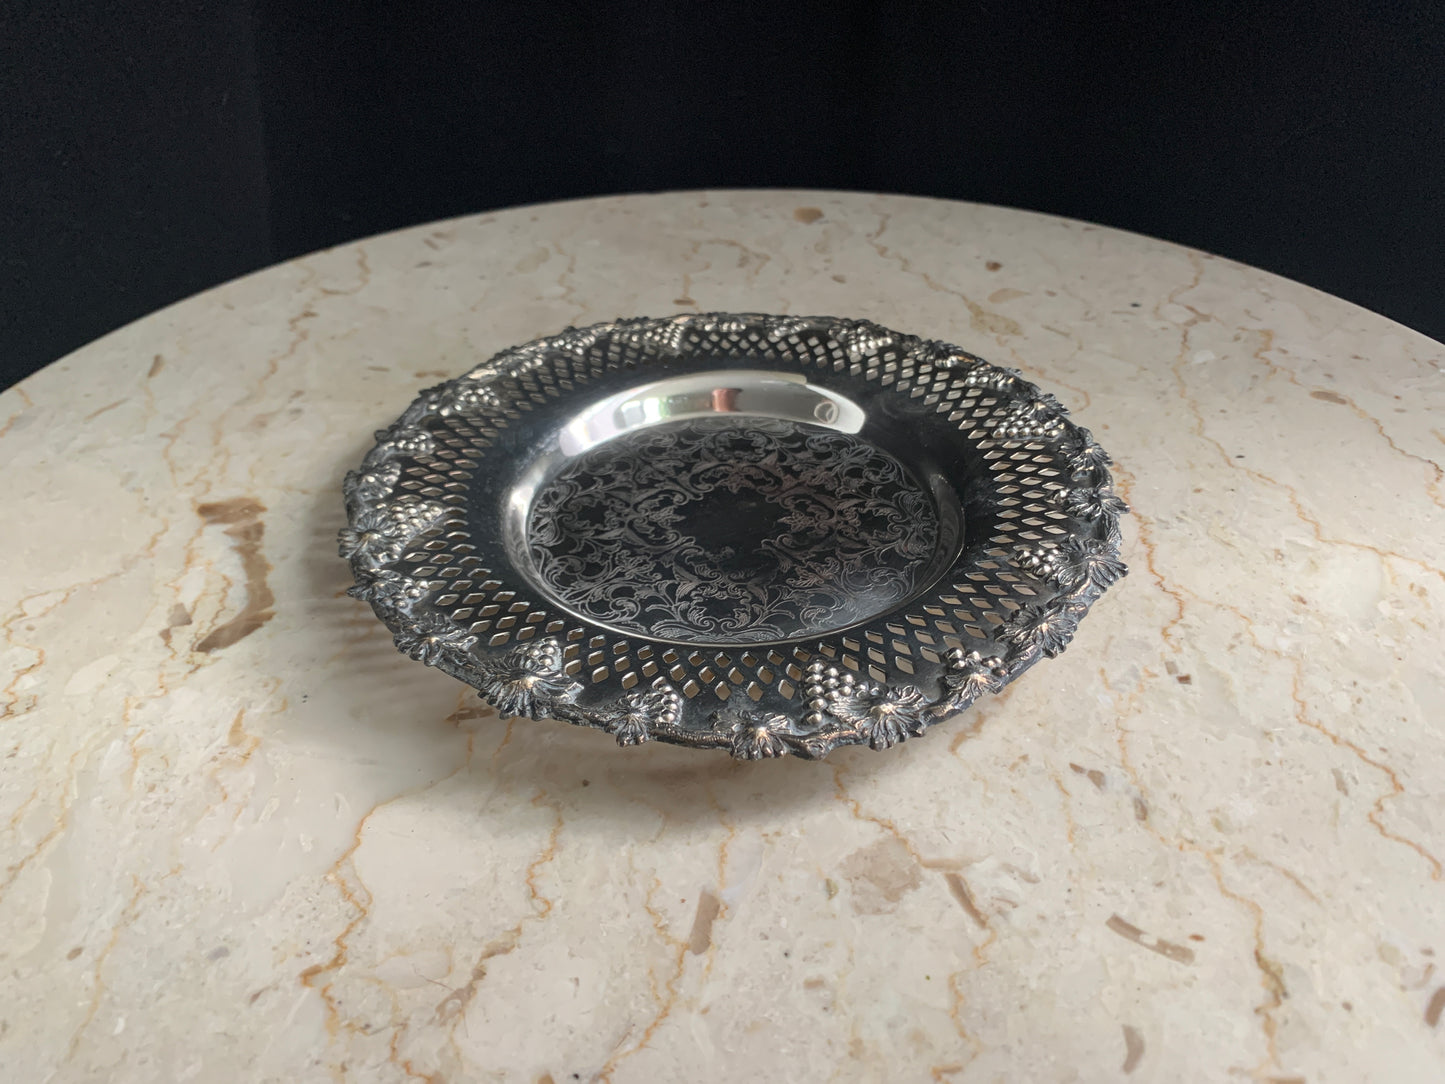 Wm A Rogers Old English Reproduction 6112 - Silver Plated Dish - Formal Dining Table Decor - Silver Vanity Dish Dresser Decor Catch all